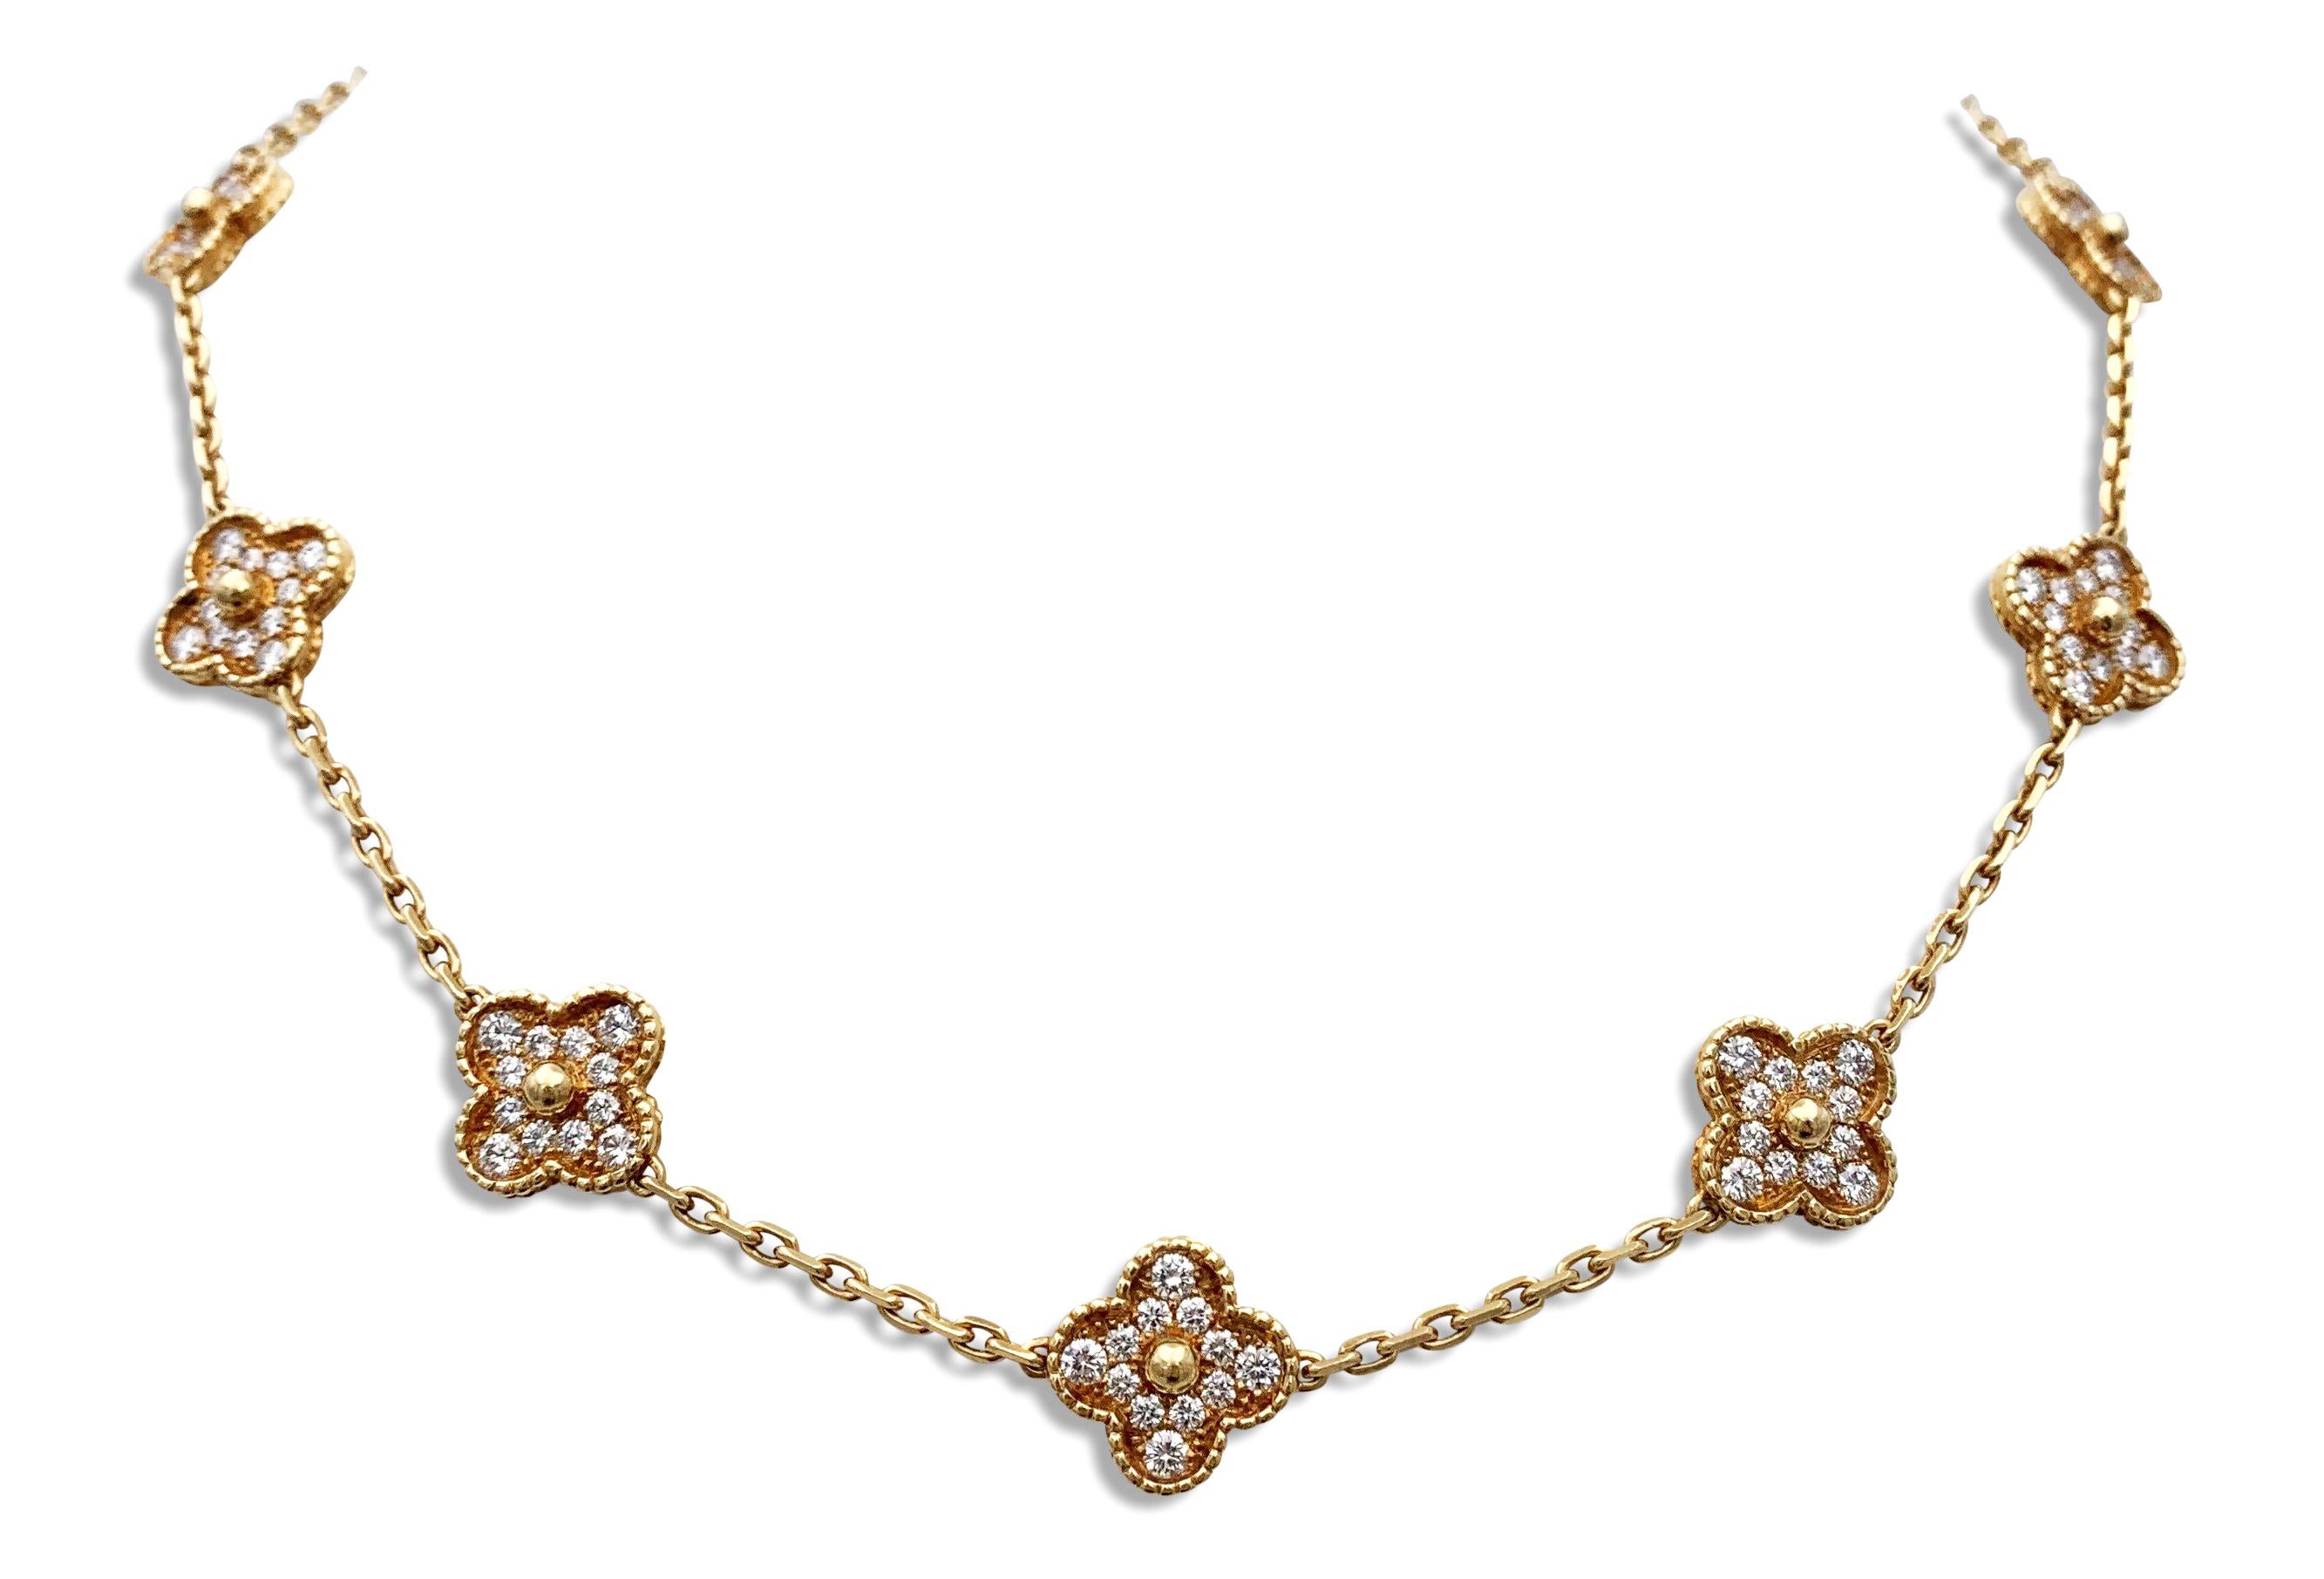 Authentic Van Cleef & Arpels 'Vintage Alhambra' necklace crafted in 18 karat yellow gold featuring 10 clover leaf inspired motifs set with high-quality round brilliant cut diamonds, weighing an estimated 5.60 cttw.  The necklace measures 17 1/2